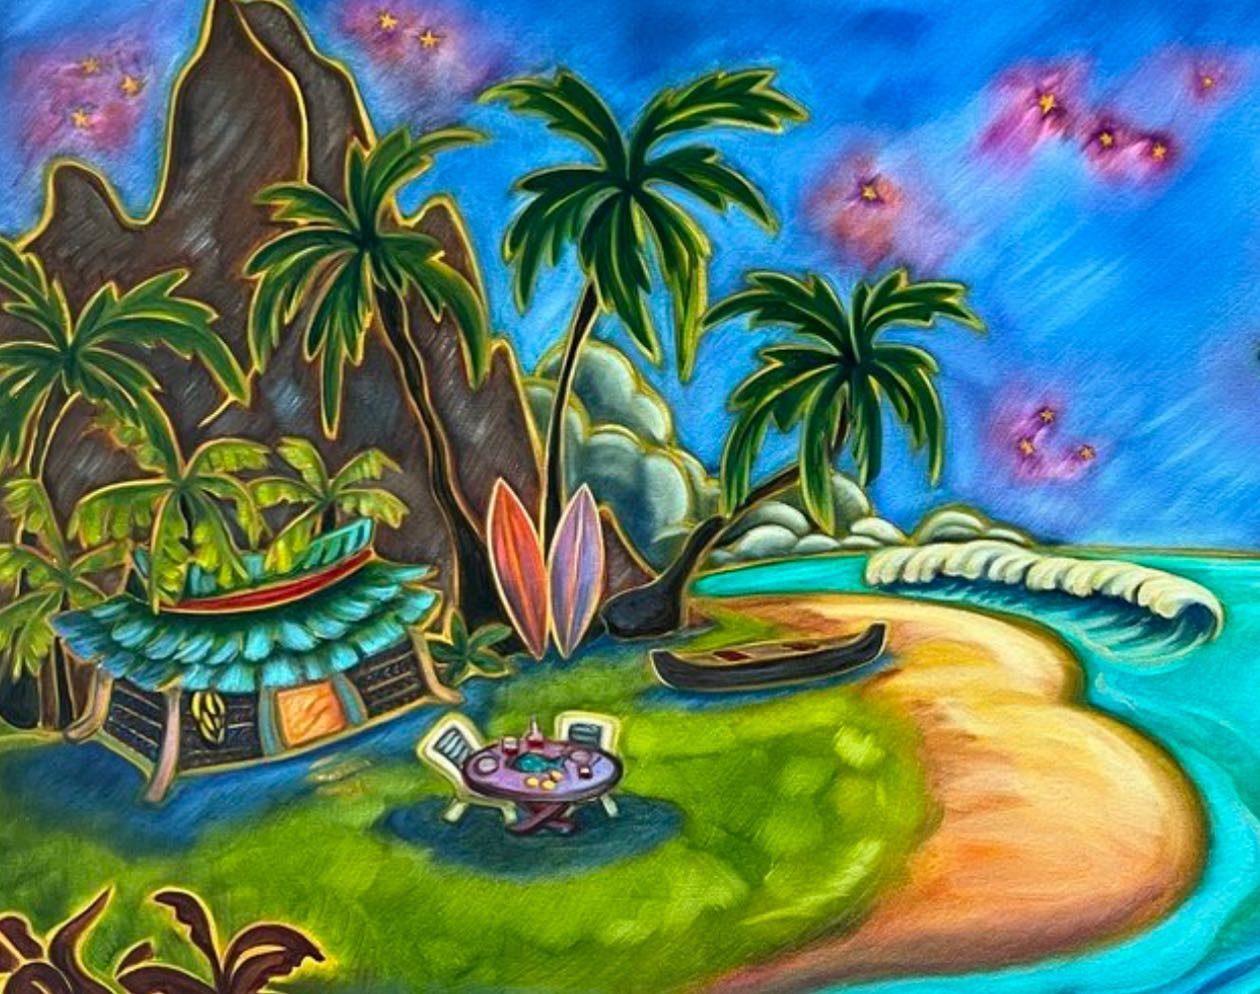 I love including a simple Hawaiian hut as an emblem of old Hawaii🌺 For me, the huts create an atmosphere of a time that has passed, or perhaps the viewer has stumbled onto a beach cove with a Hawaiian hale that has been untouched by Modern society ✨